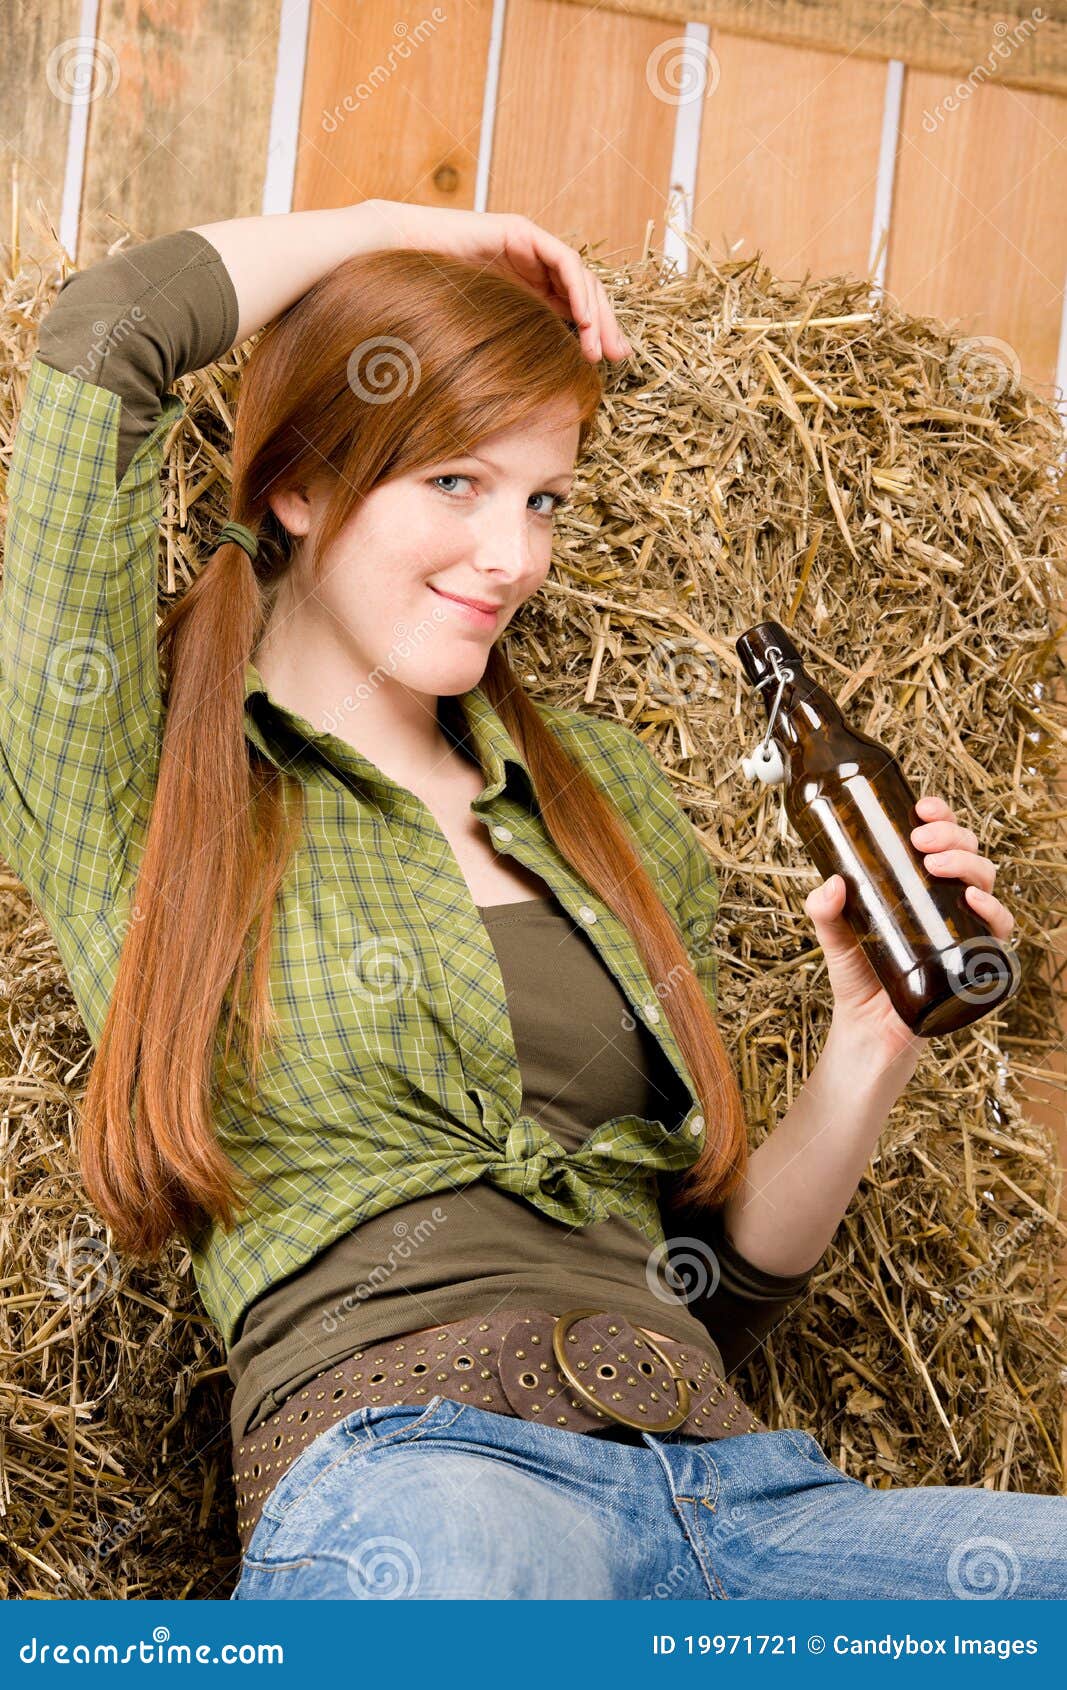 Provocative Young Cowgirl Drink Beer In Barn Stock Image 